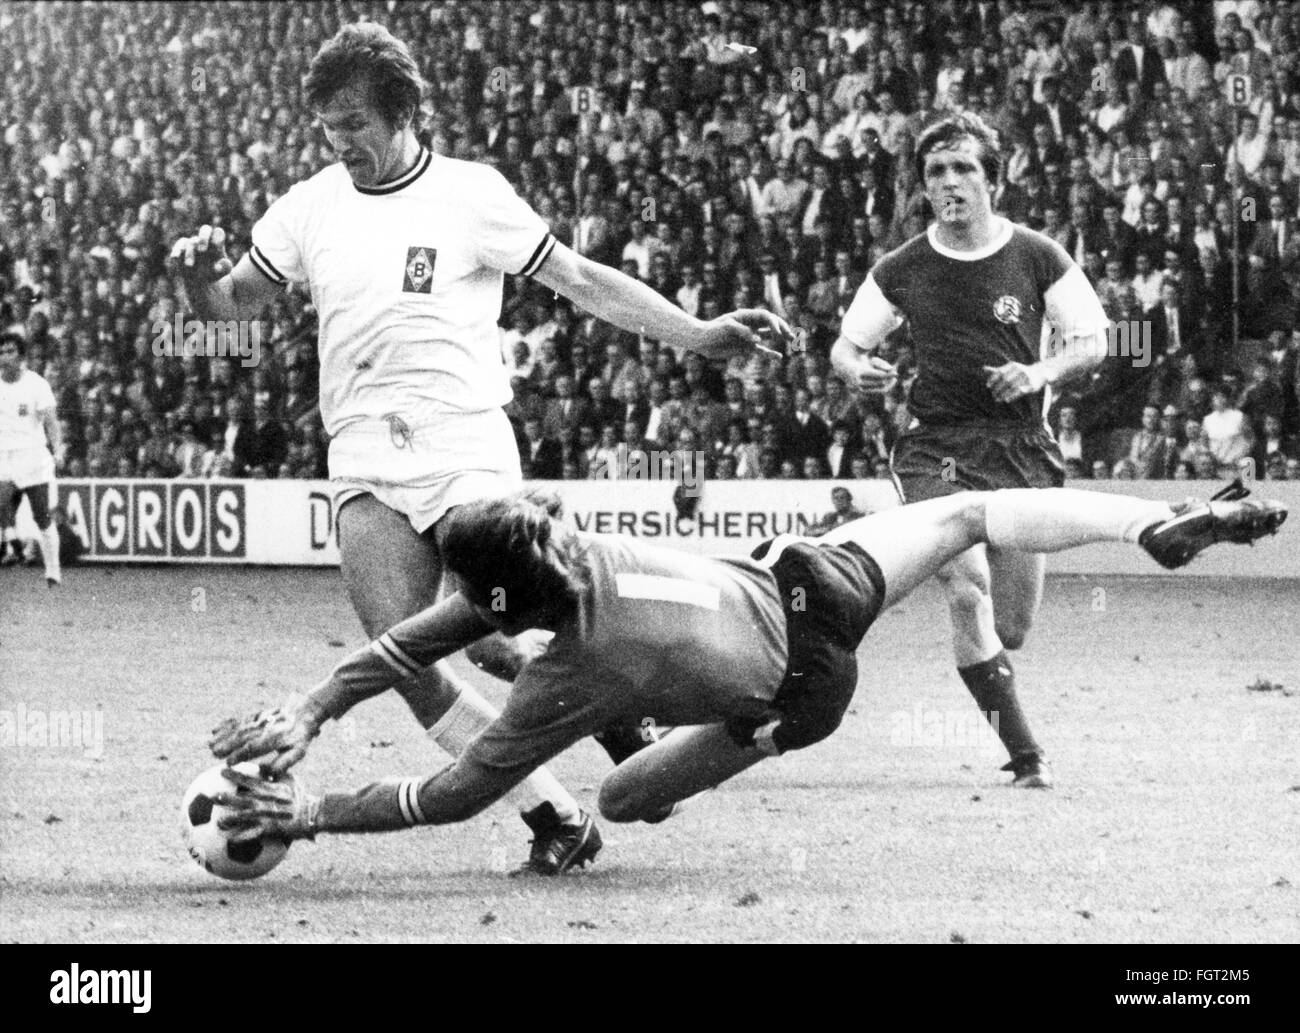 sports,football,games,Germany,national league,season 1970 / 1971,33rd match day,game Borussia Moenchengladbach versus Rot-Weiss Essen(4: 3),Boekelbergstadion,Moenchengladbach,29.5.1971,goal keeper Heinz Blasey(Essen)repelles the attack of striker Jupp Heynckes,behind defender Roland Peitsch,Rot Weiss,football match,soccer match,football matches,footballer,footballers,kicker,football player,football players,action,act,actions,acts,assaults,assault,attack,offensive move,attacks,offensive moves,defences,defenses,defense,defenc,Additional-Rights-Clearences-Not Available Stock Photo